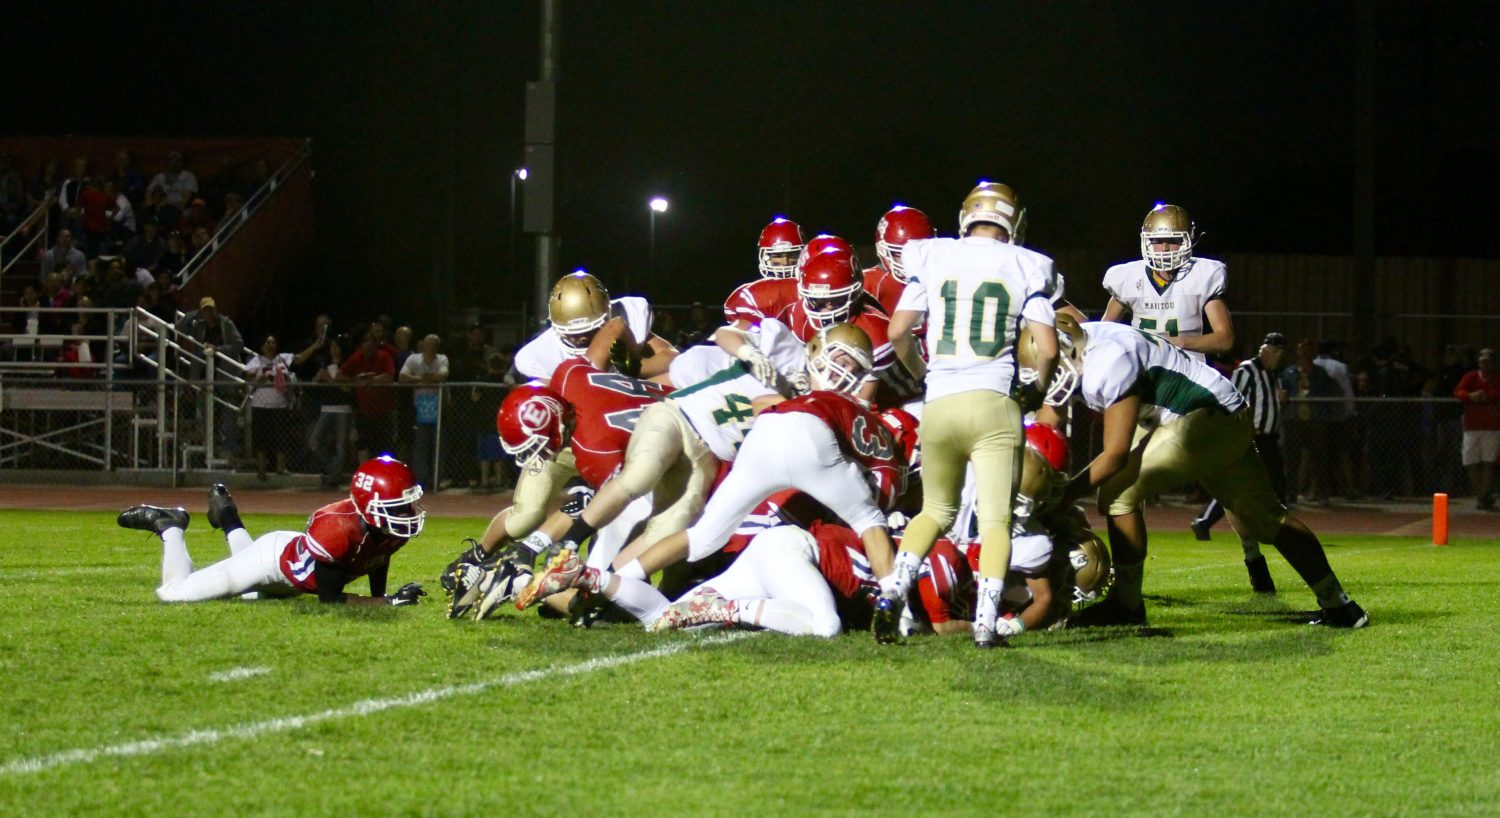 Eaton Reds defeat Manitou Springs for Homecoming victory